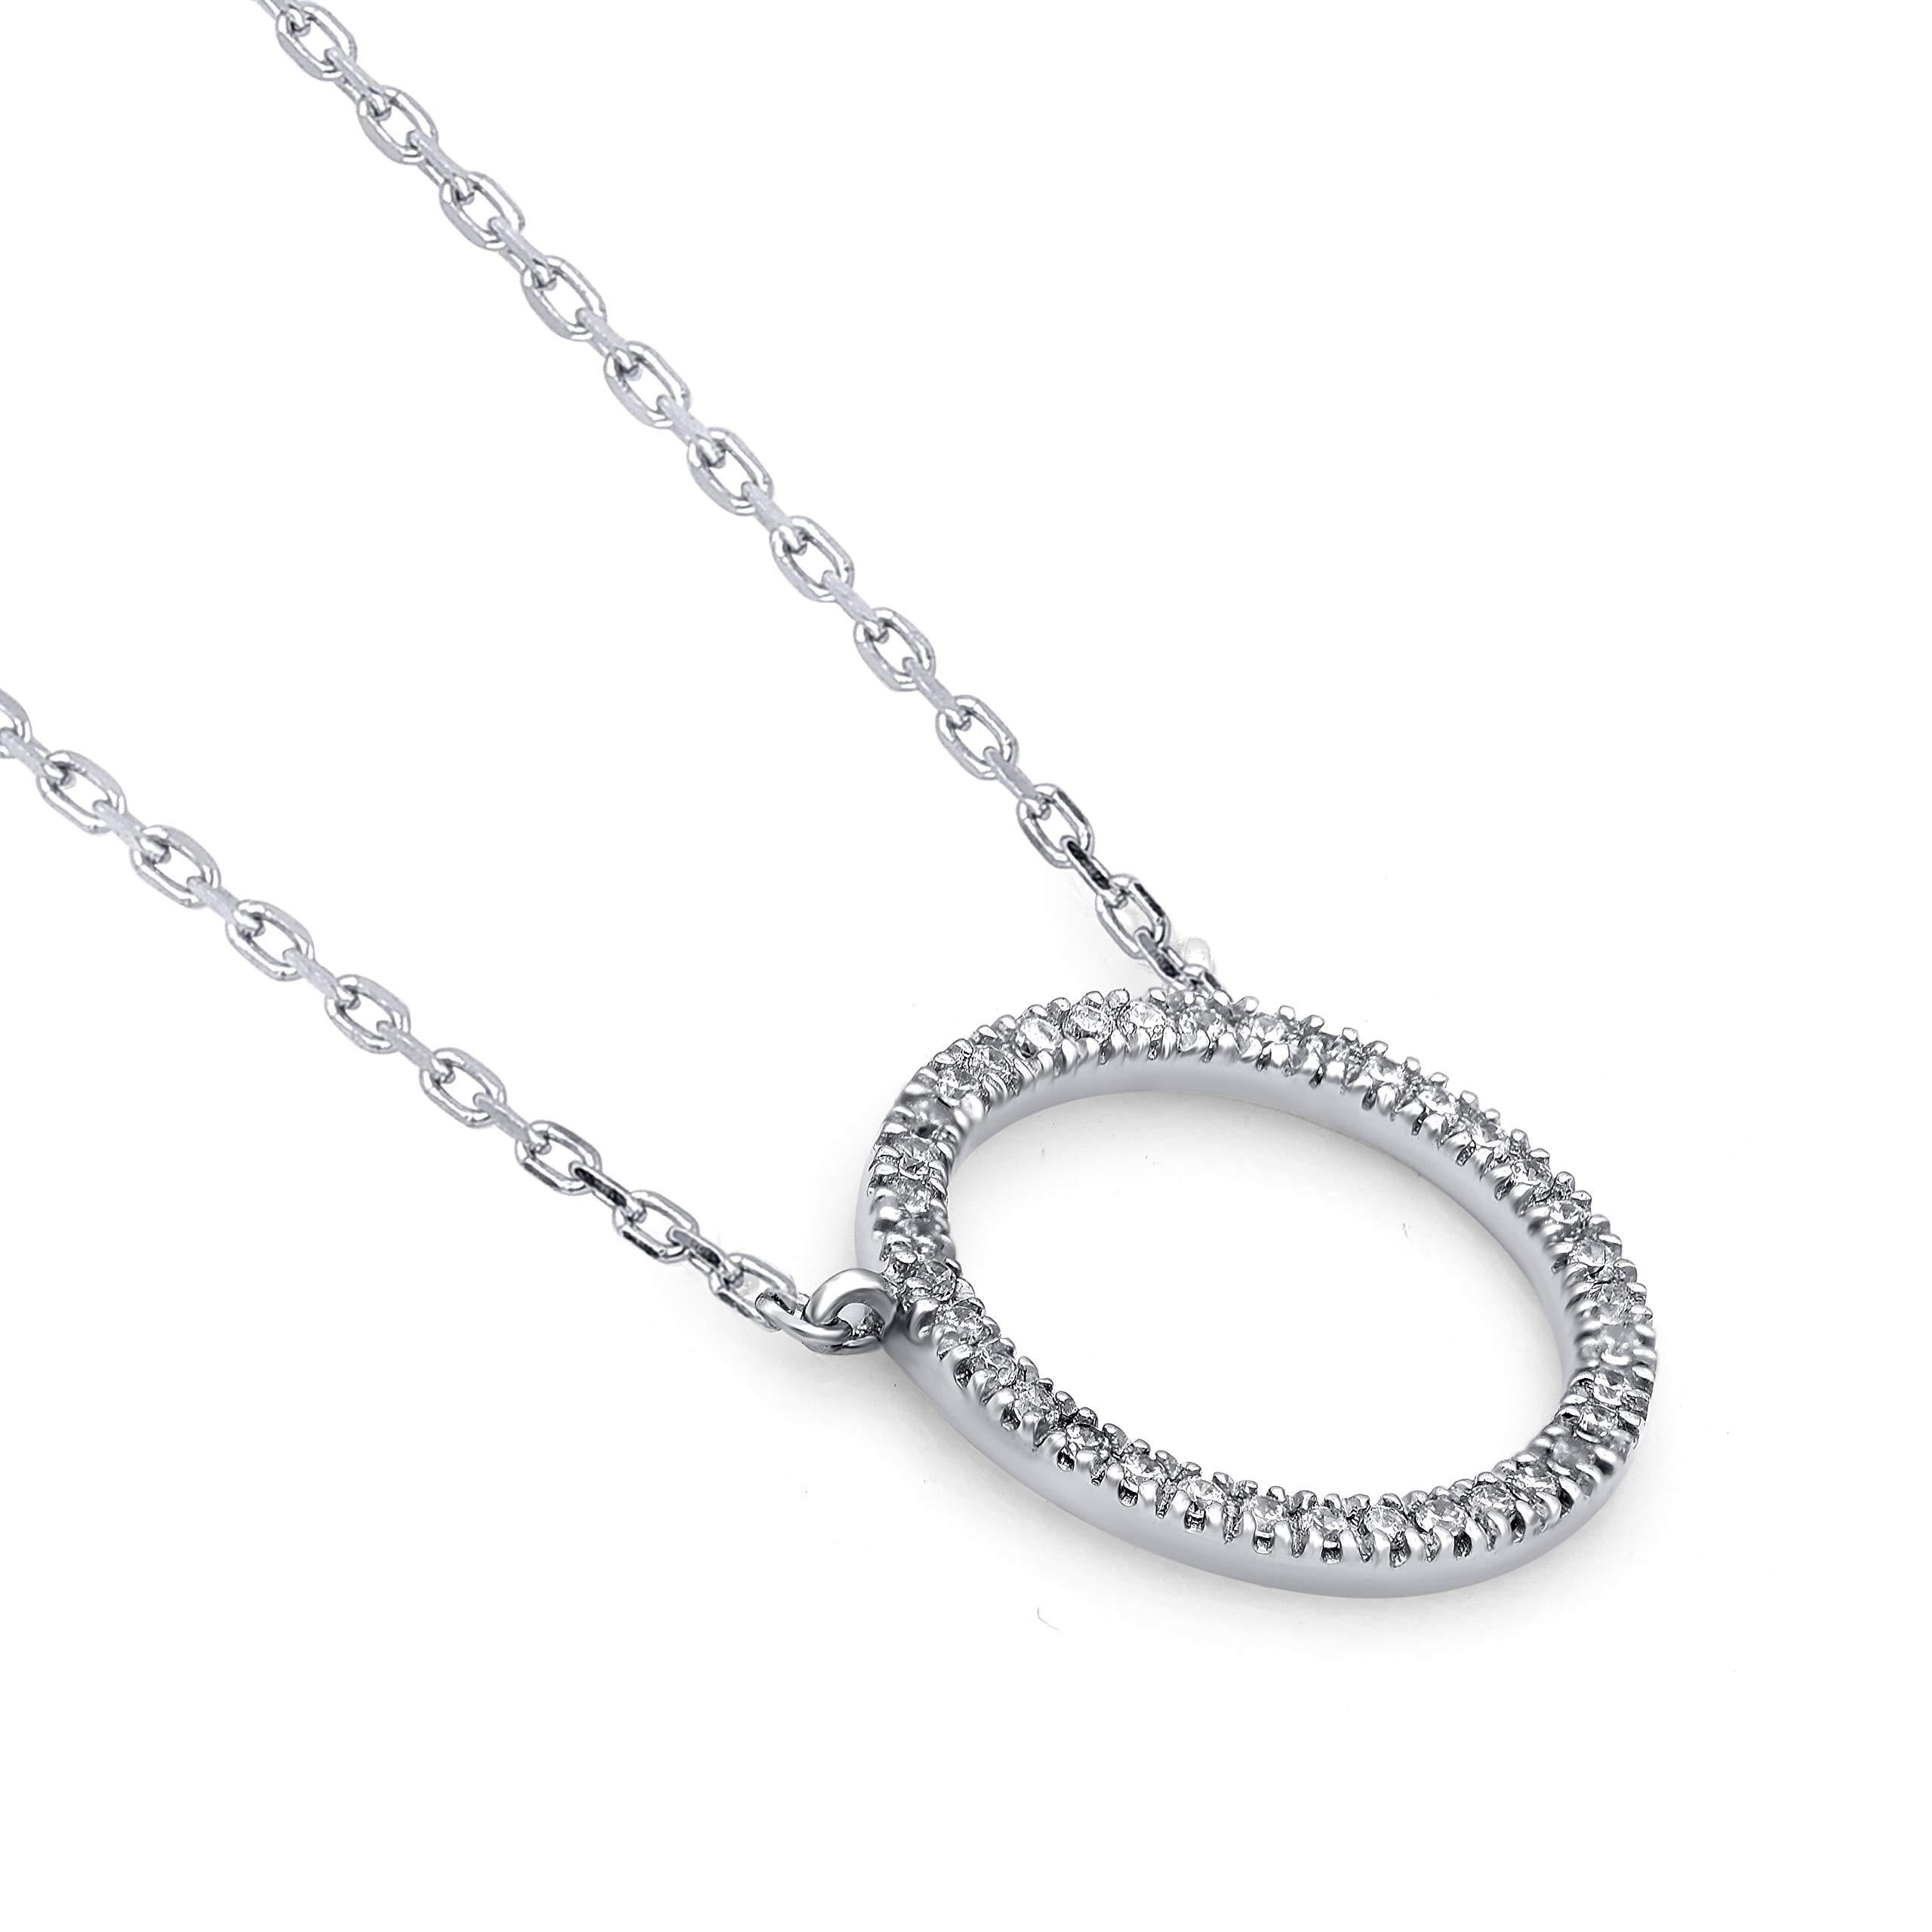 This diamond open circle eternity pendant fits any occasion with ease. These eternity pendants are studded with 36 single cut natural diamonds in prong setting and crafted in 14 karat white gold. Diamonds are graded as H-I color and I-2 clarity.